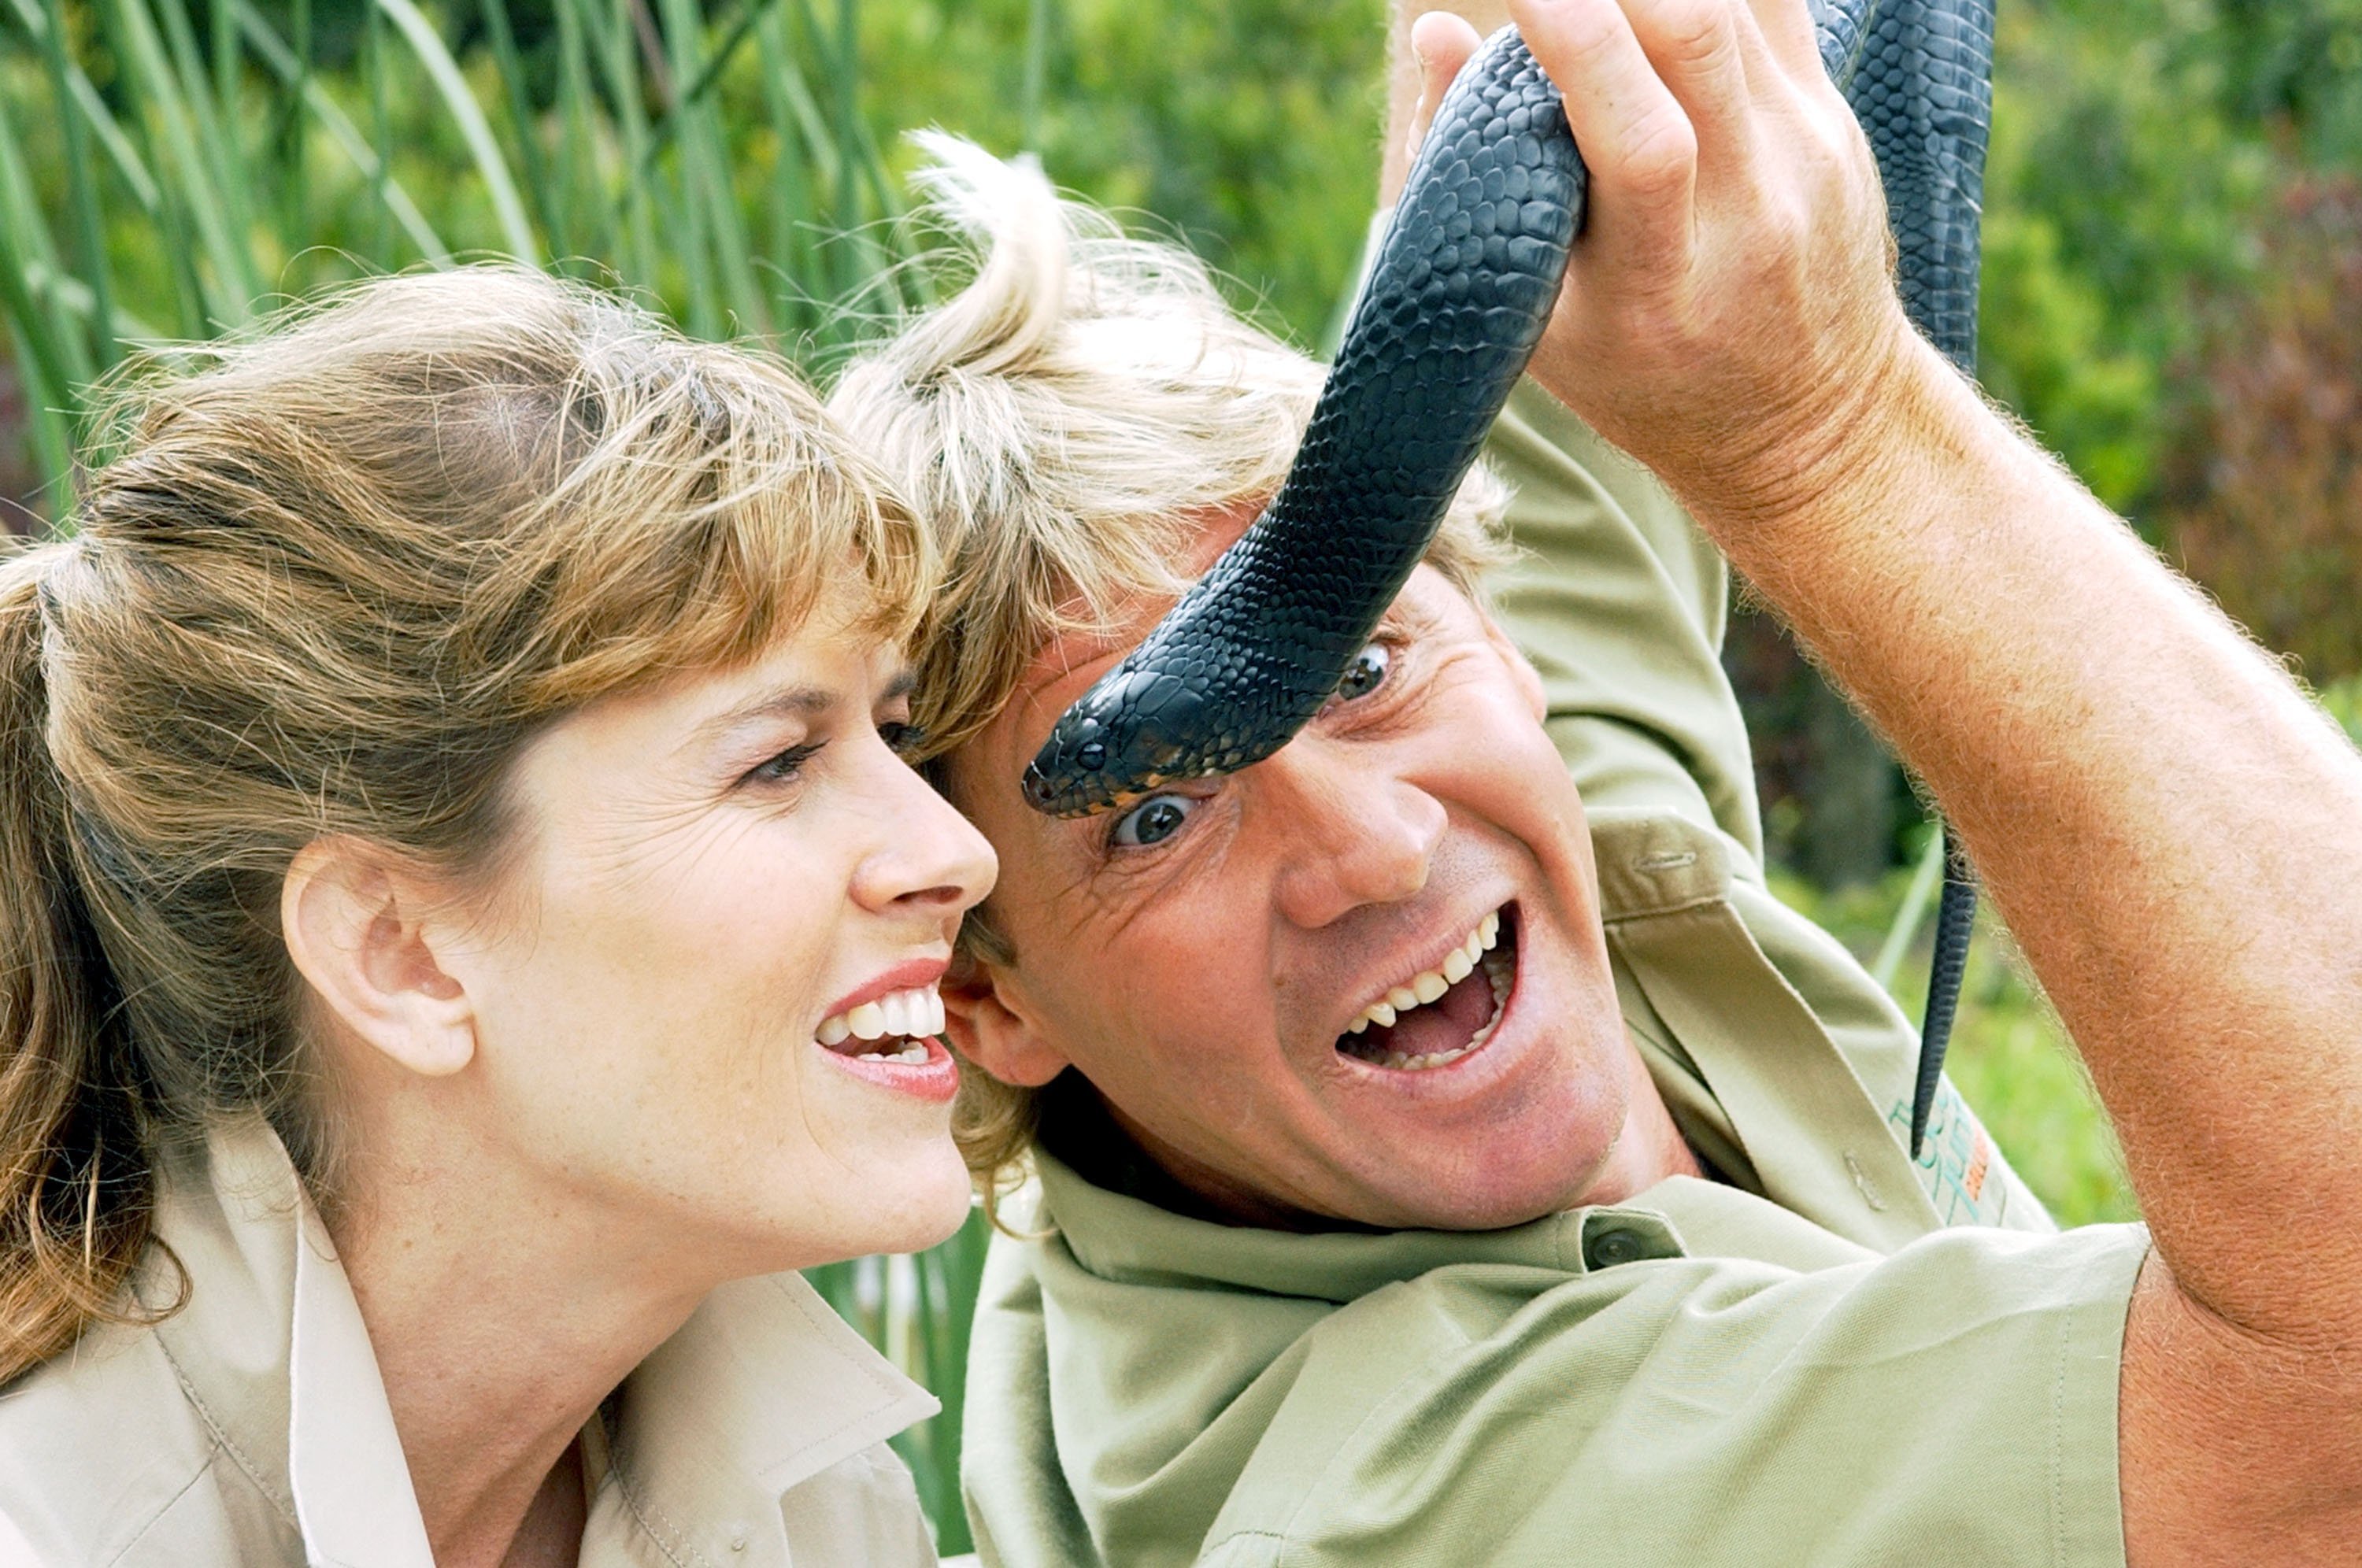 The Crocodile Hunter, Steve Irwin, shows a snake to his wife Terri at the San Francisco Zoo | Source: Getty Images